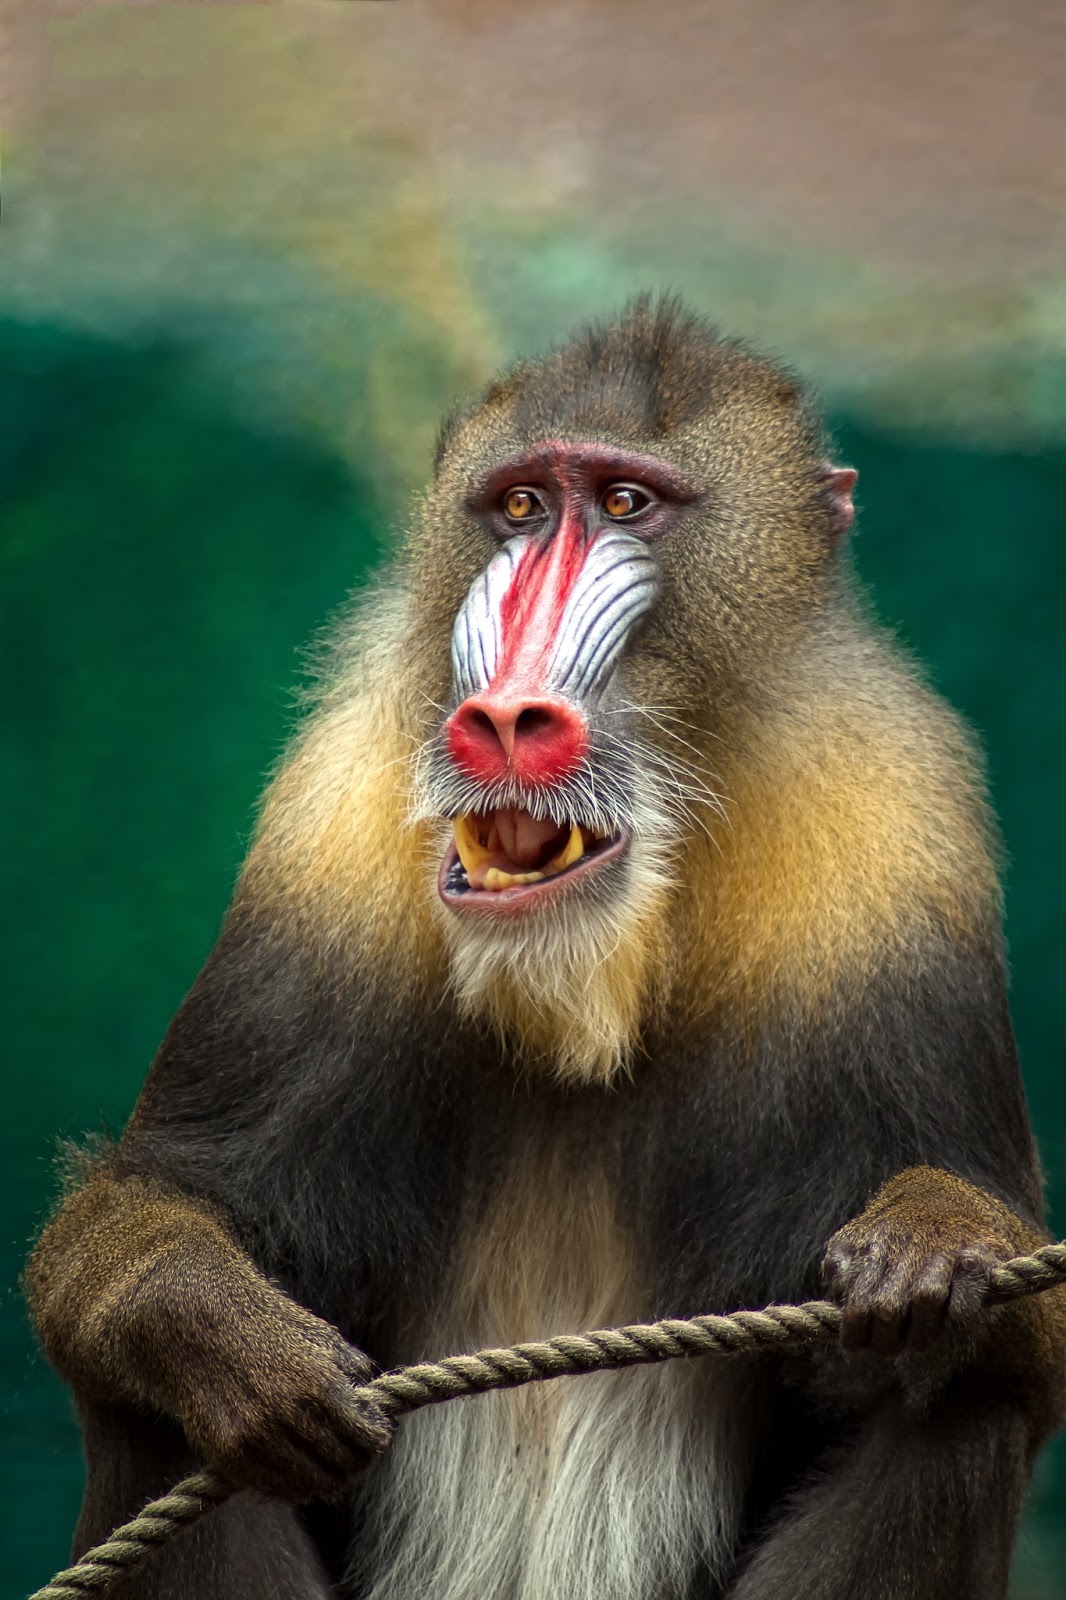 An amazing shot of the mandril with mouth slightly open and holding a rope.